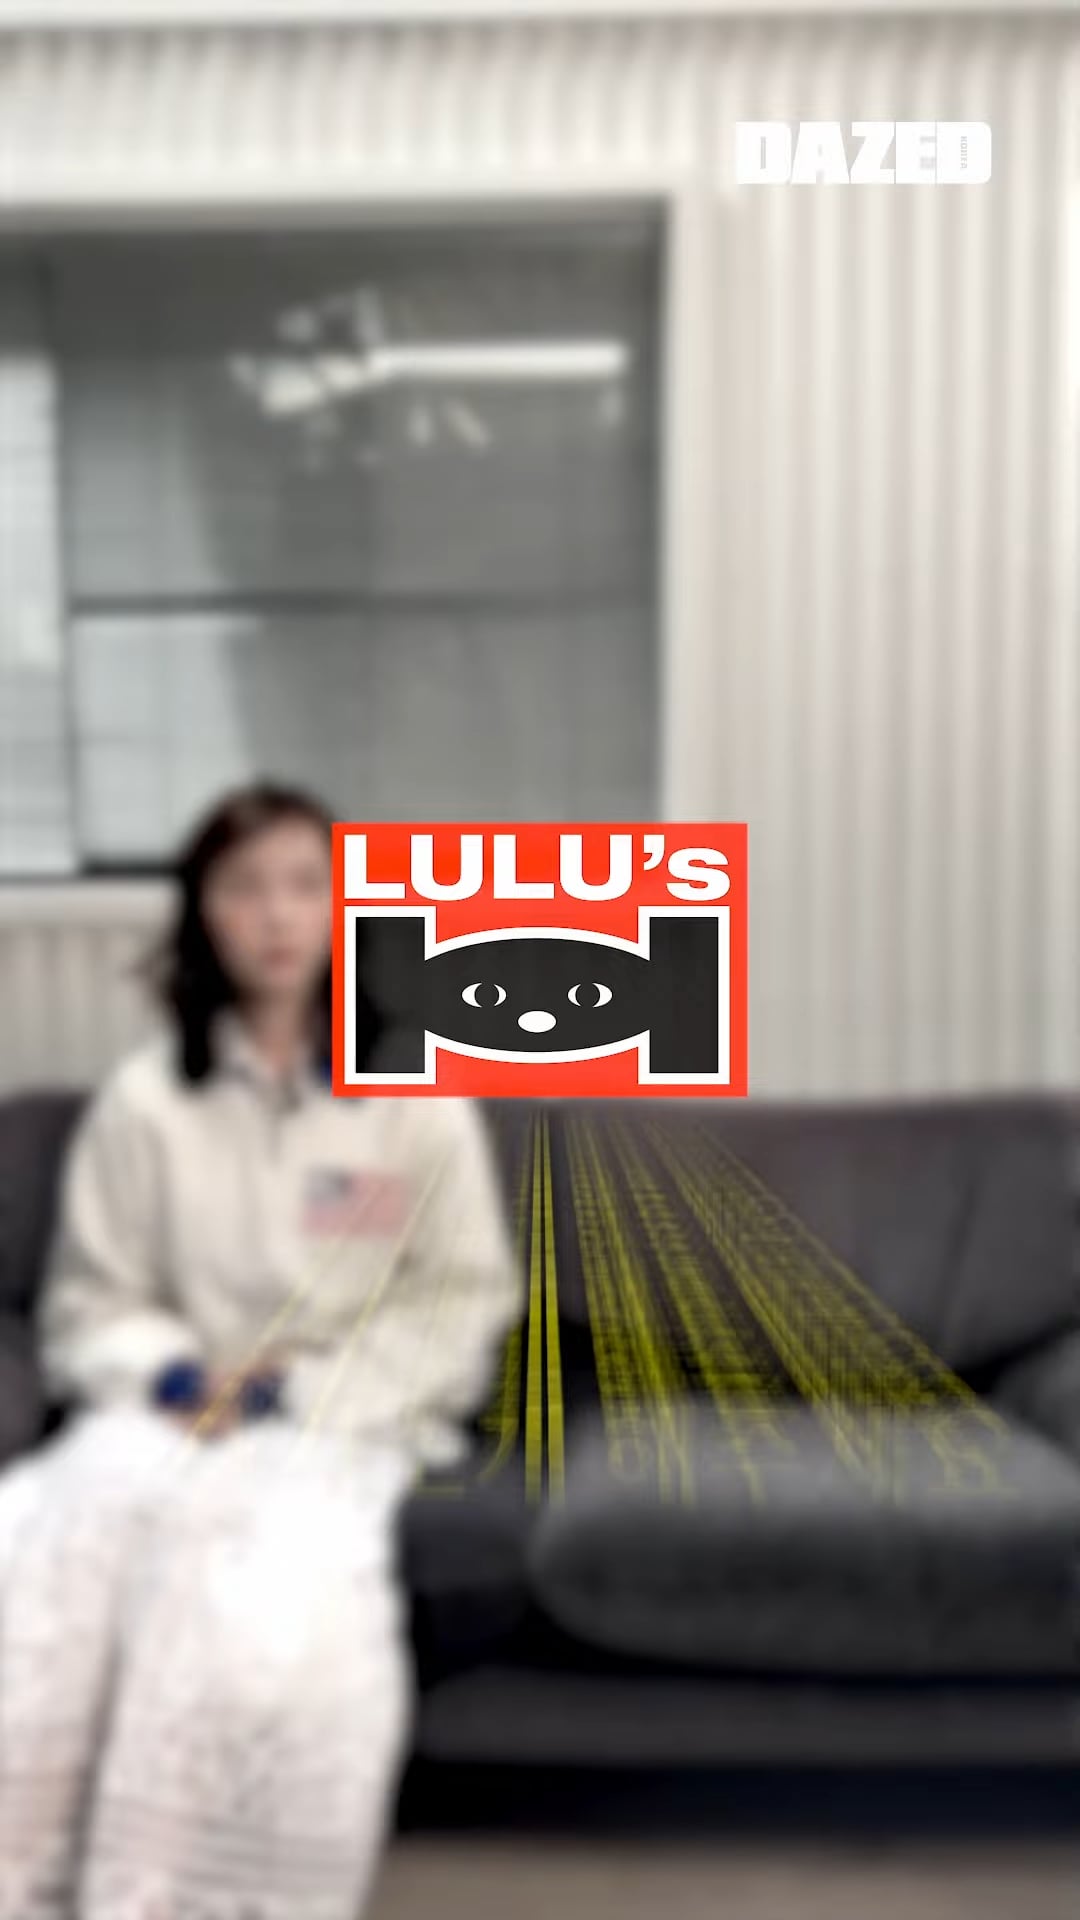 240228 DAZED KOREA YouTube Shorts Update with Winter - [LULU'S 101] FAST FORWARD with Winter